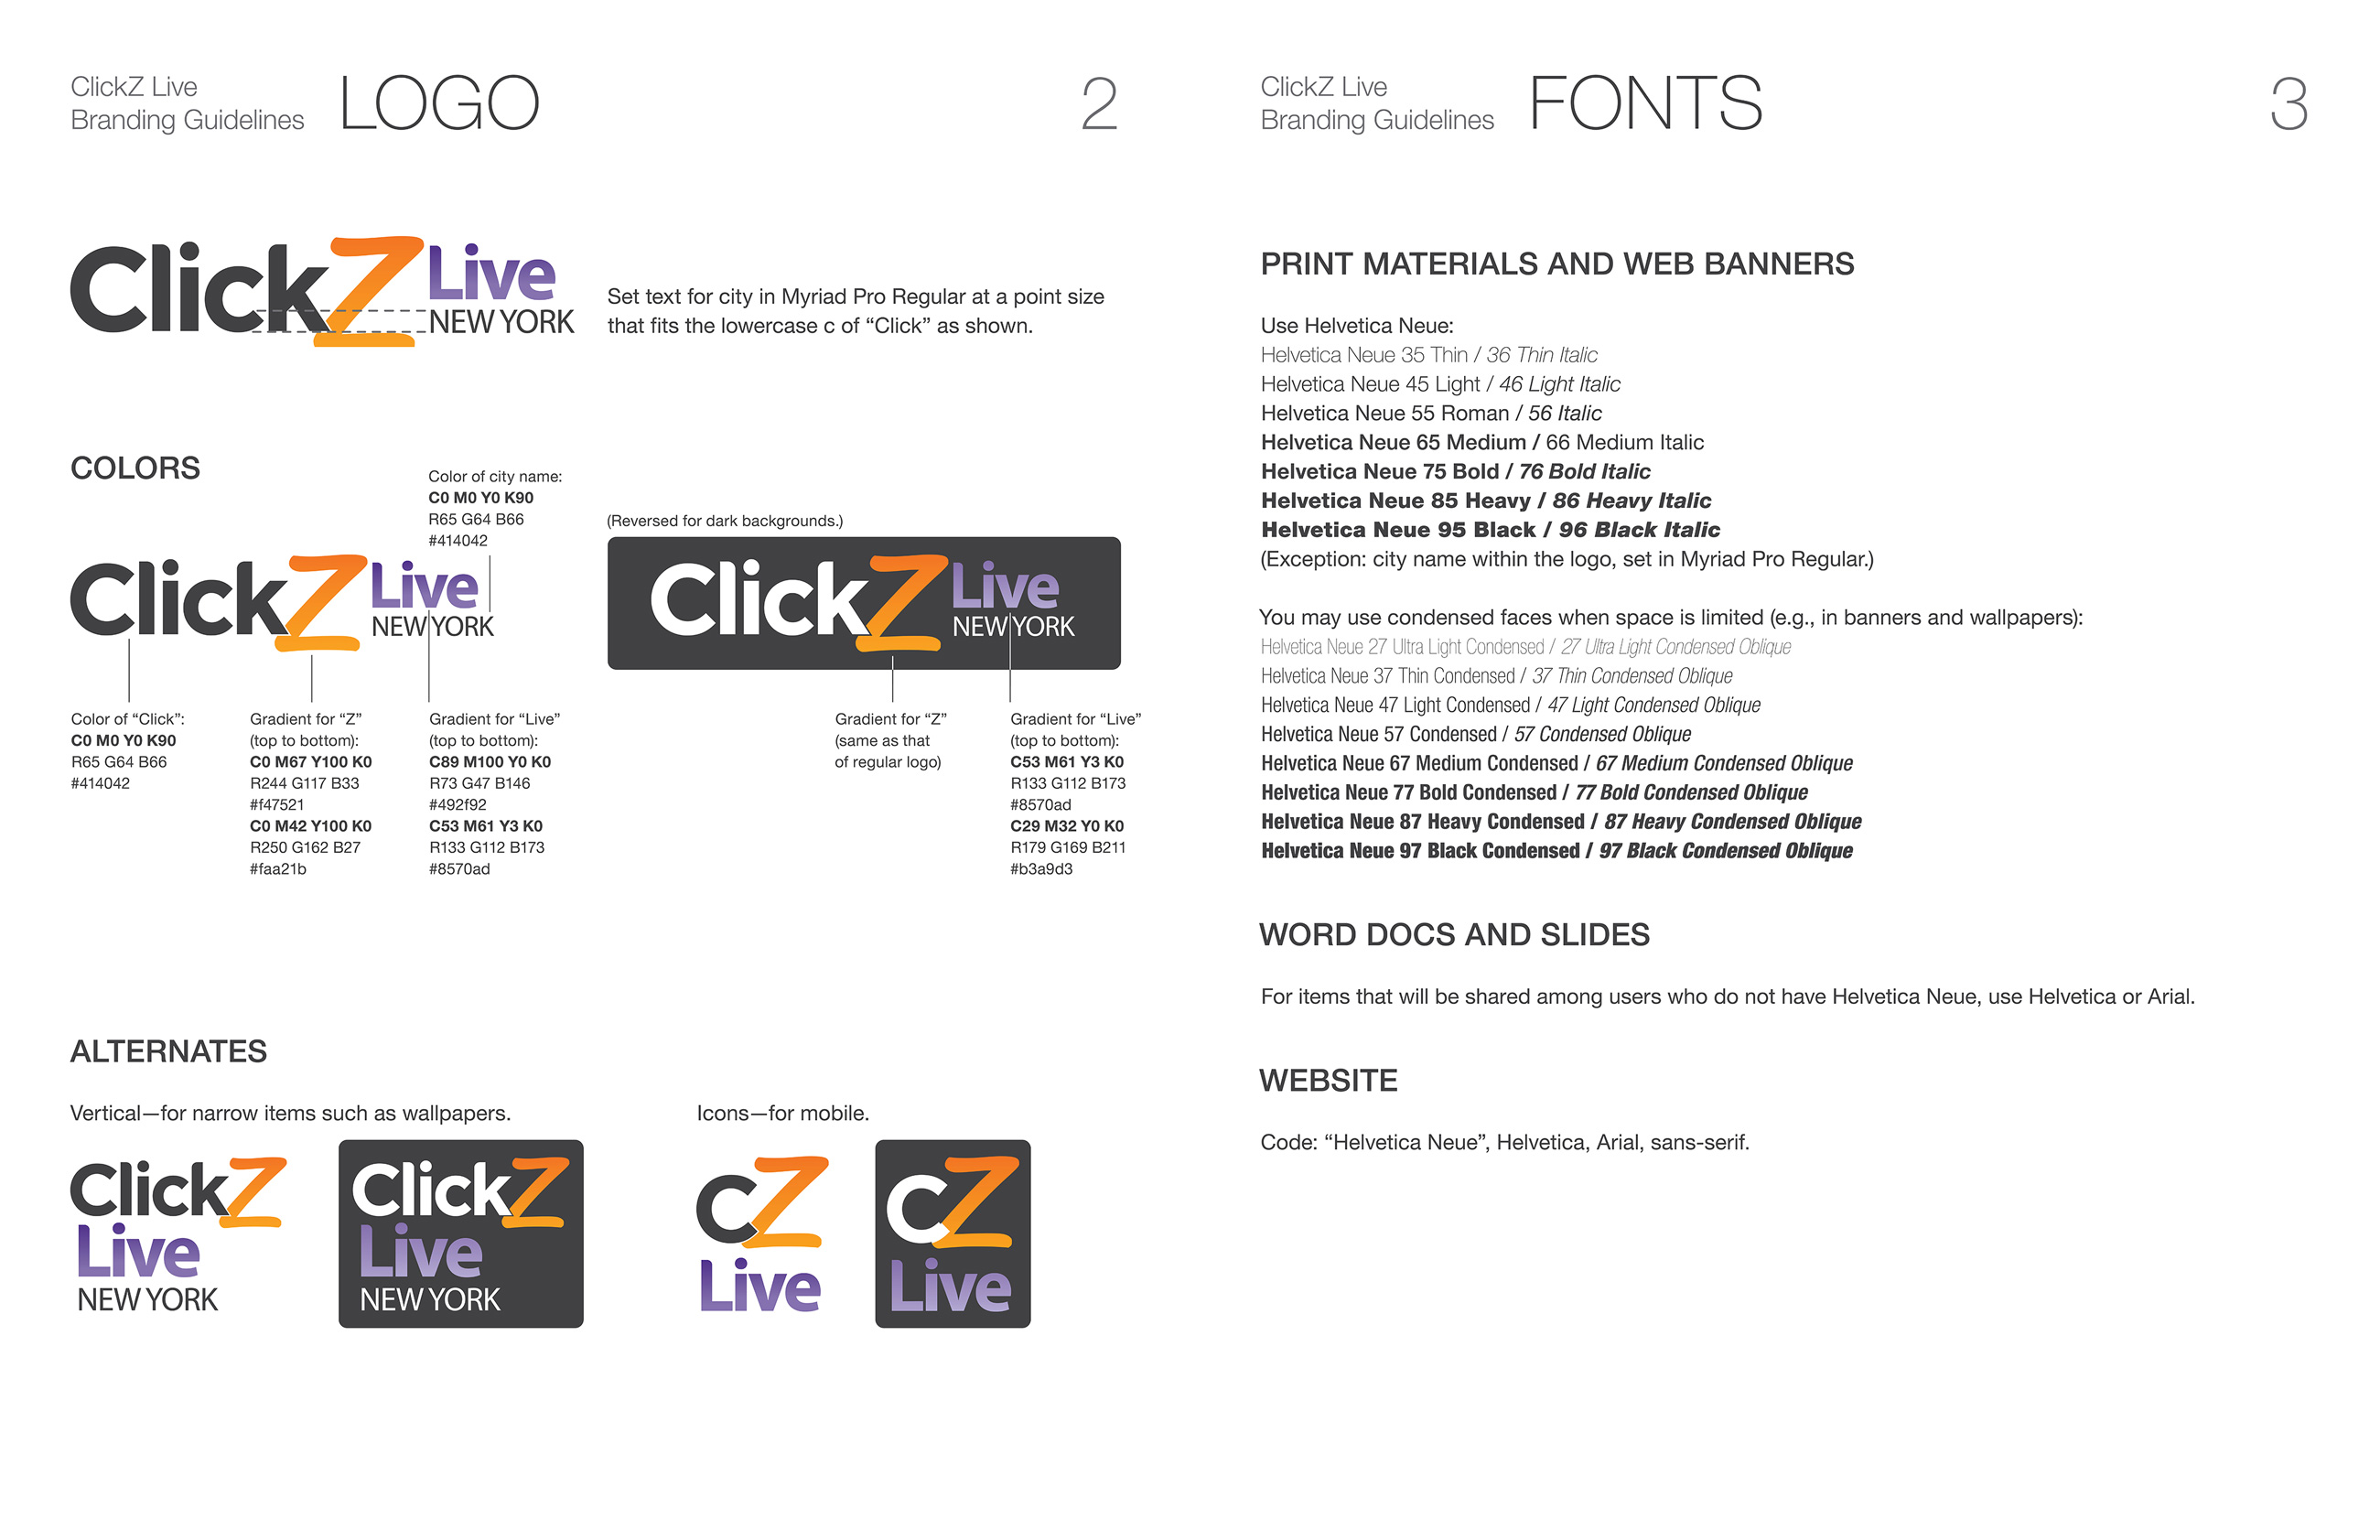 Spread from the branding guidelines for the ClickZ Live conference series. Shows the rules for using various forms of the ClickZ Live logo, which is orange, purple, and  either dark grey or white. Also shows rules for using the Helvetica Neue font.